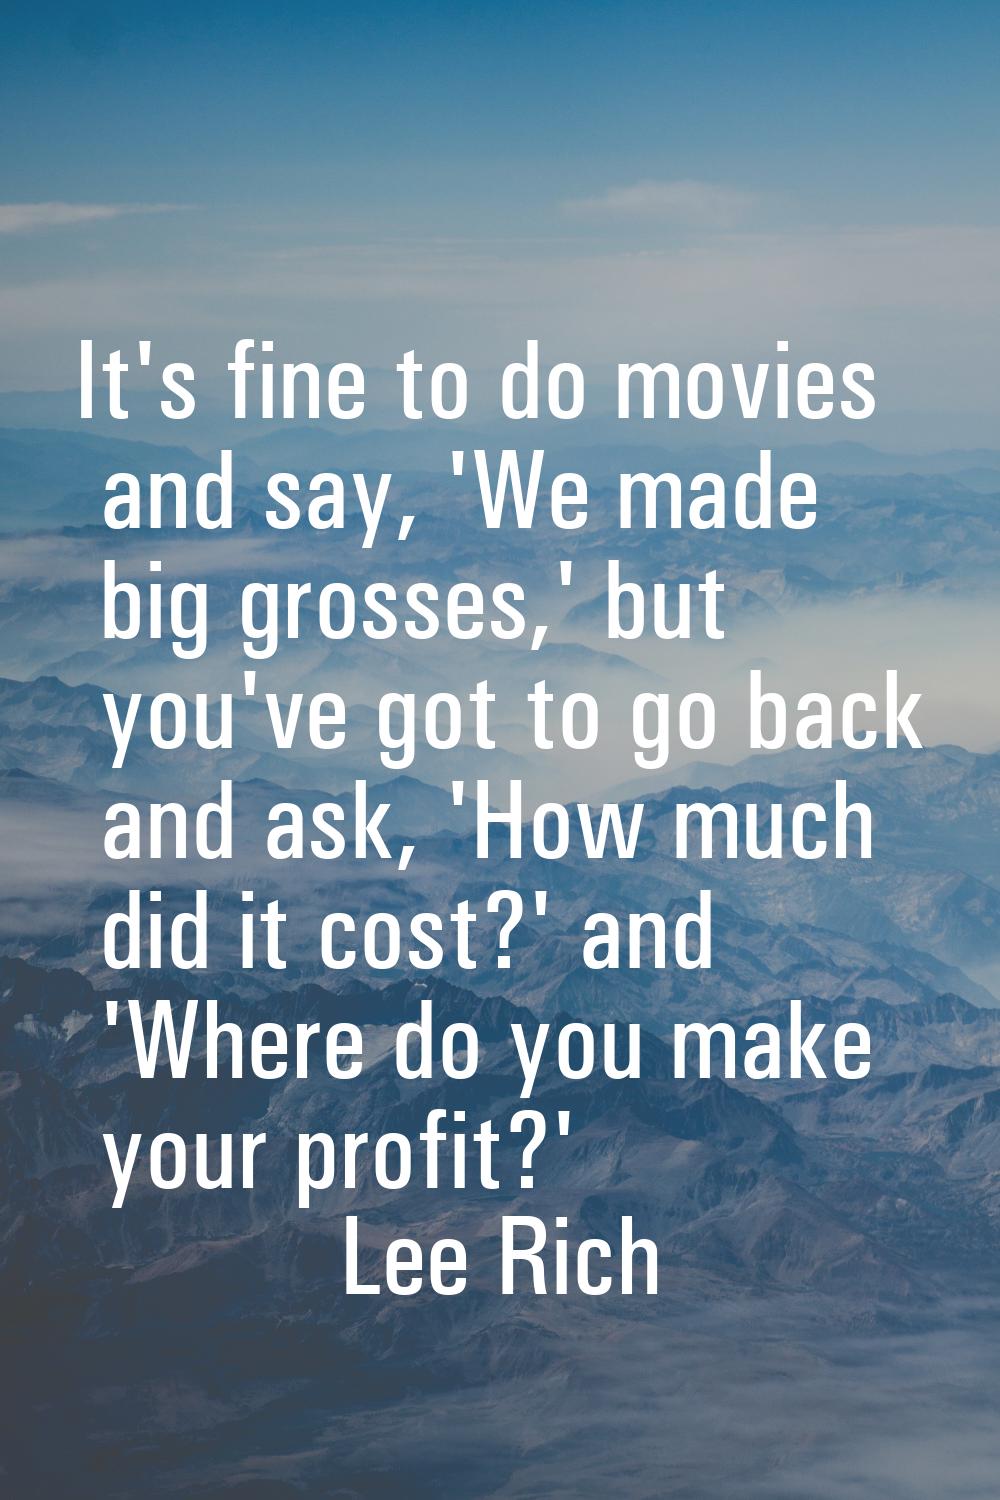 It's fine to do movies and say, 'We made big grosses,' but you've got to go back and ask, 'How much